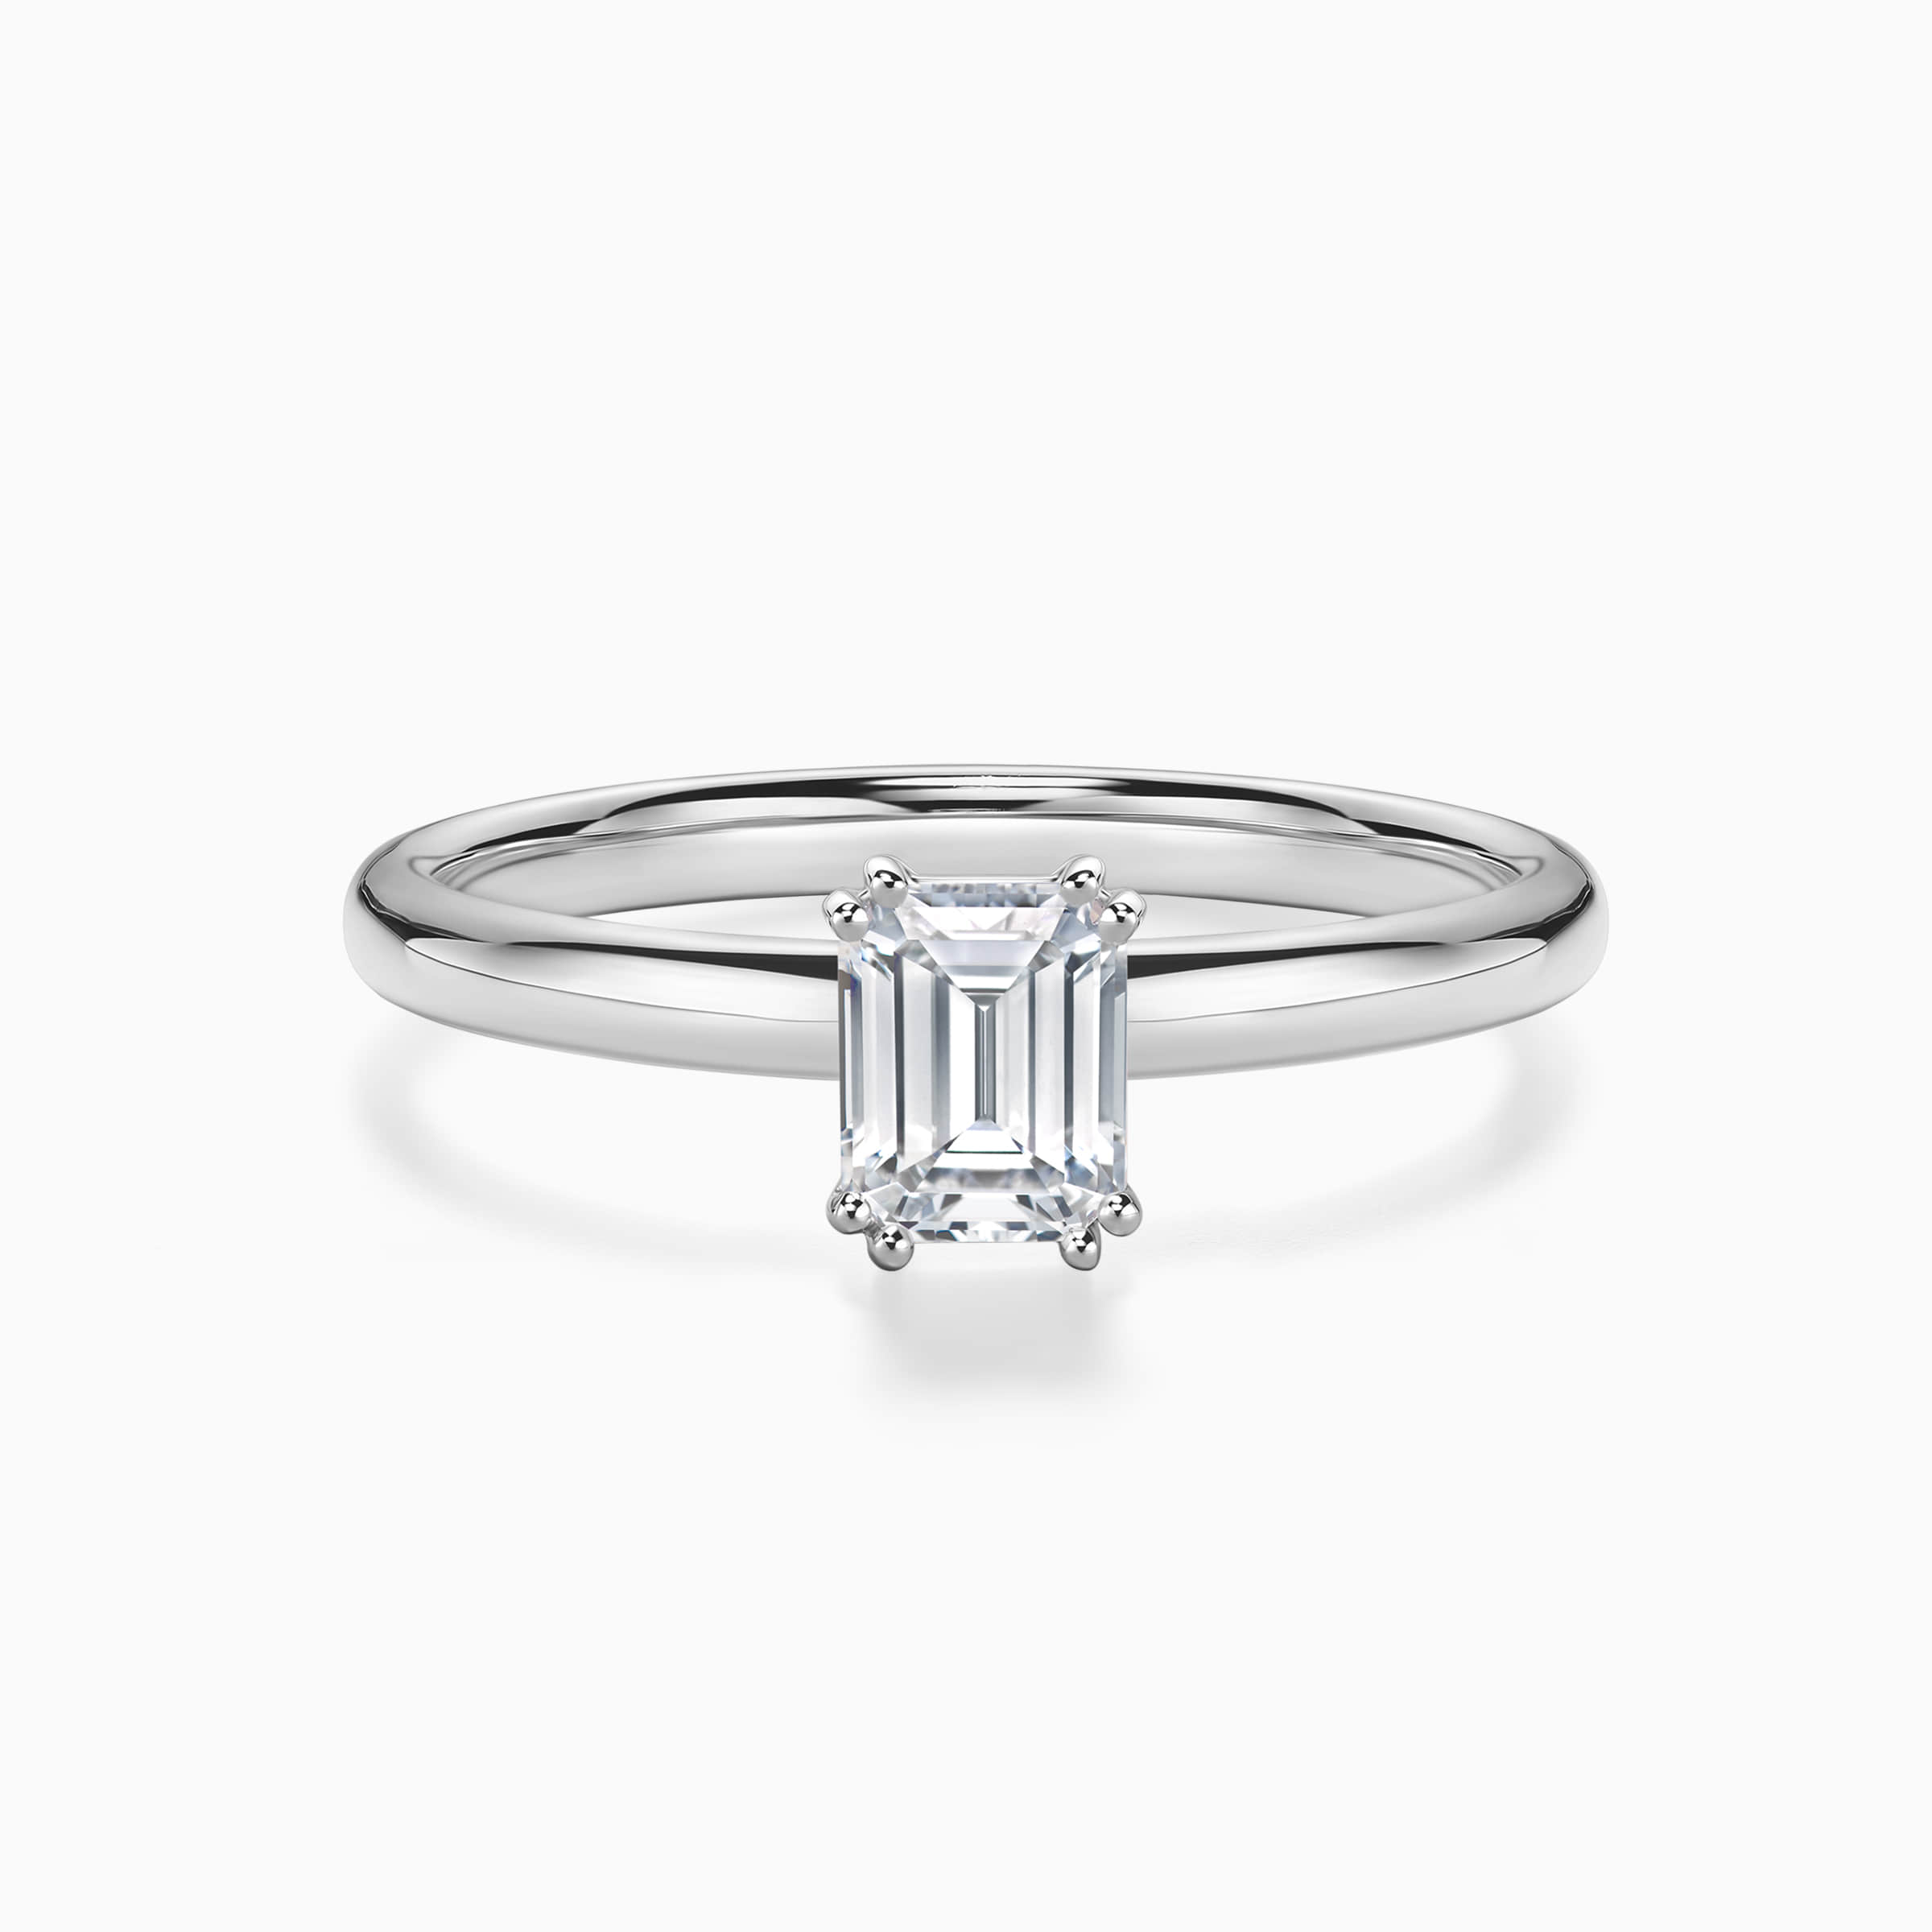 DR forever emerald cut solitaire ring